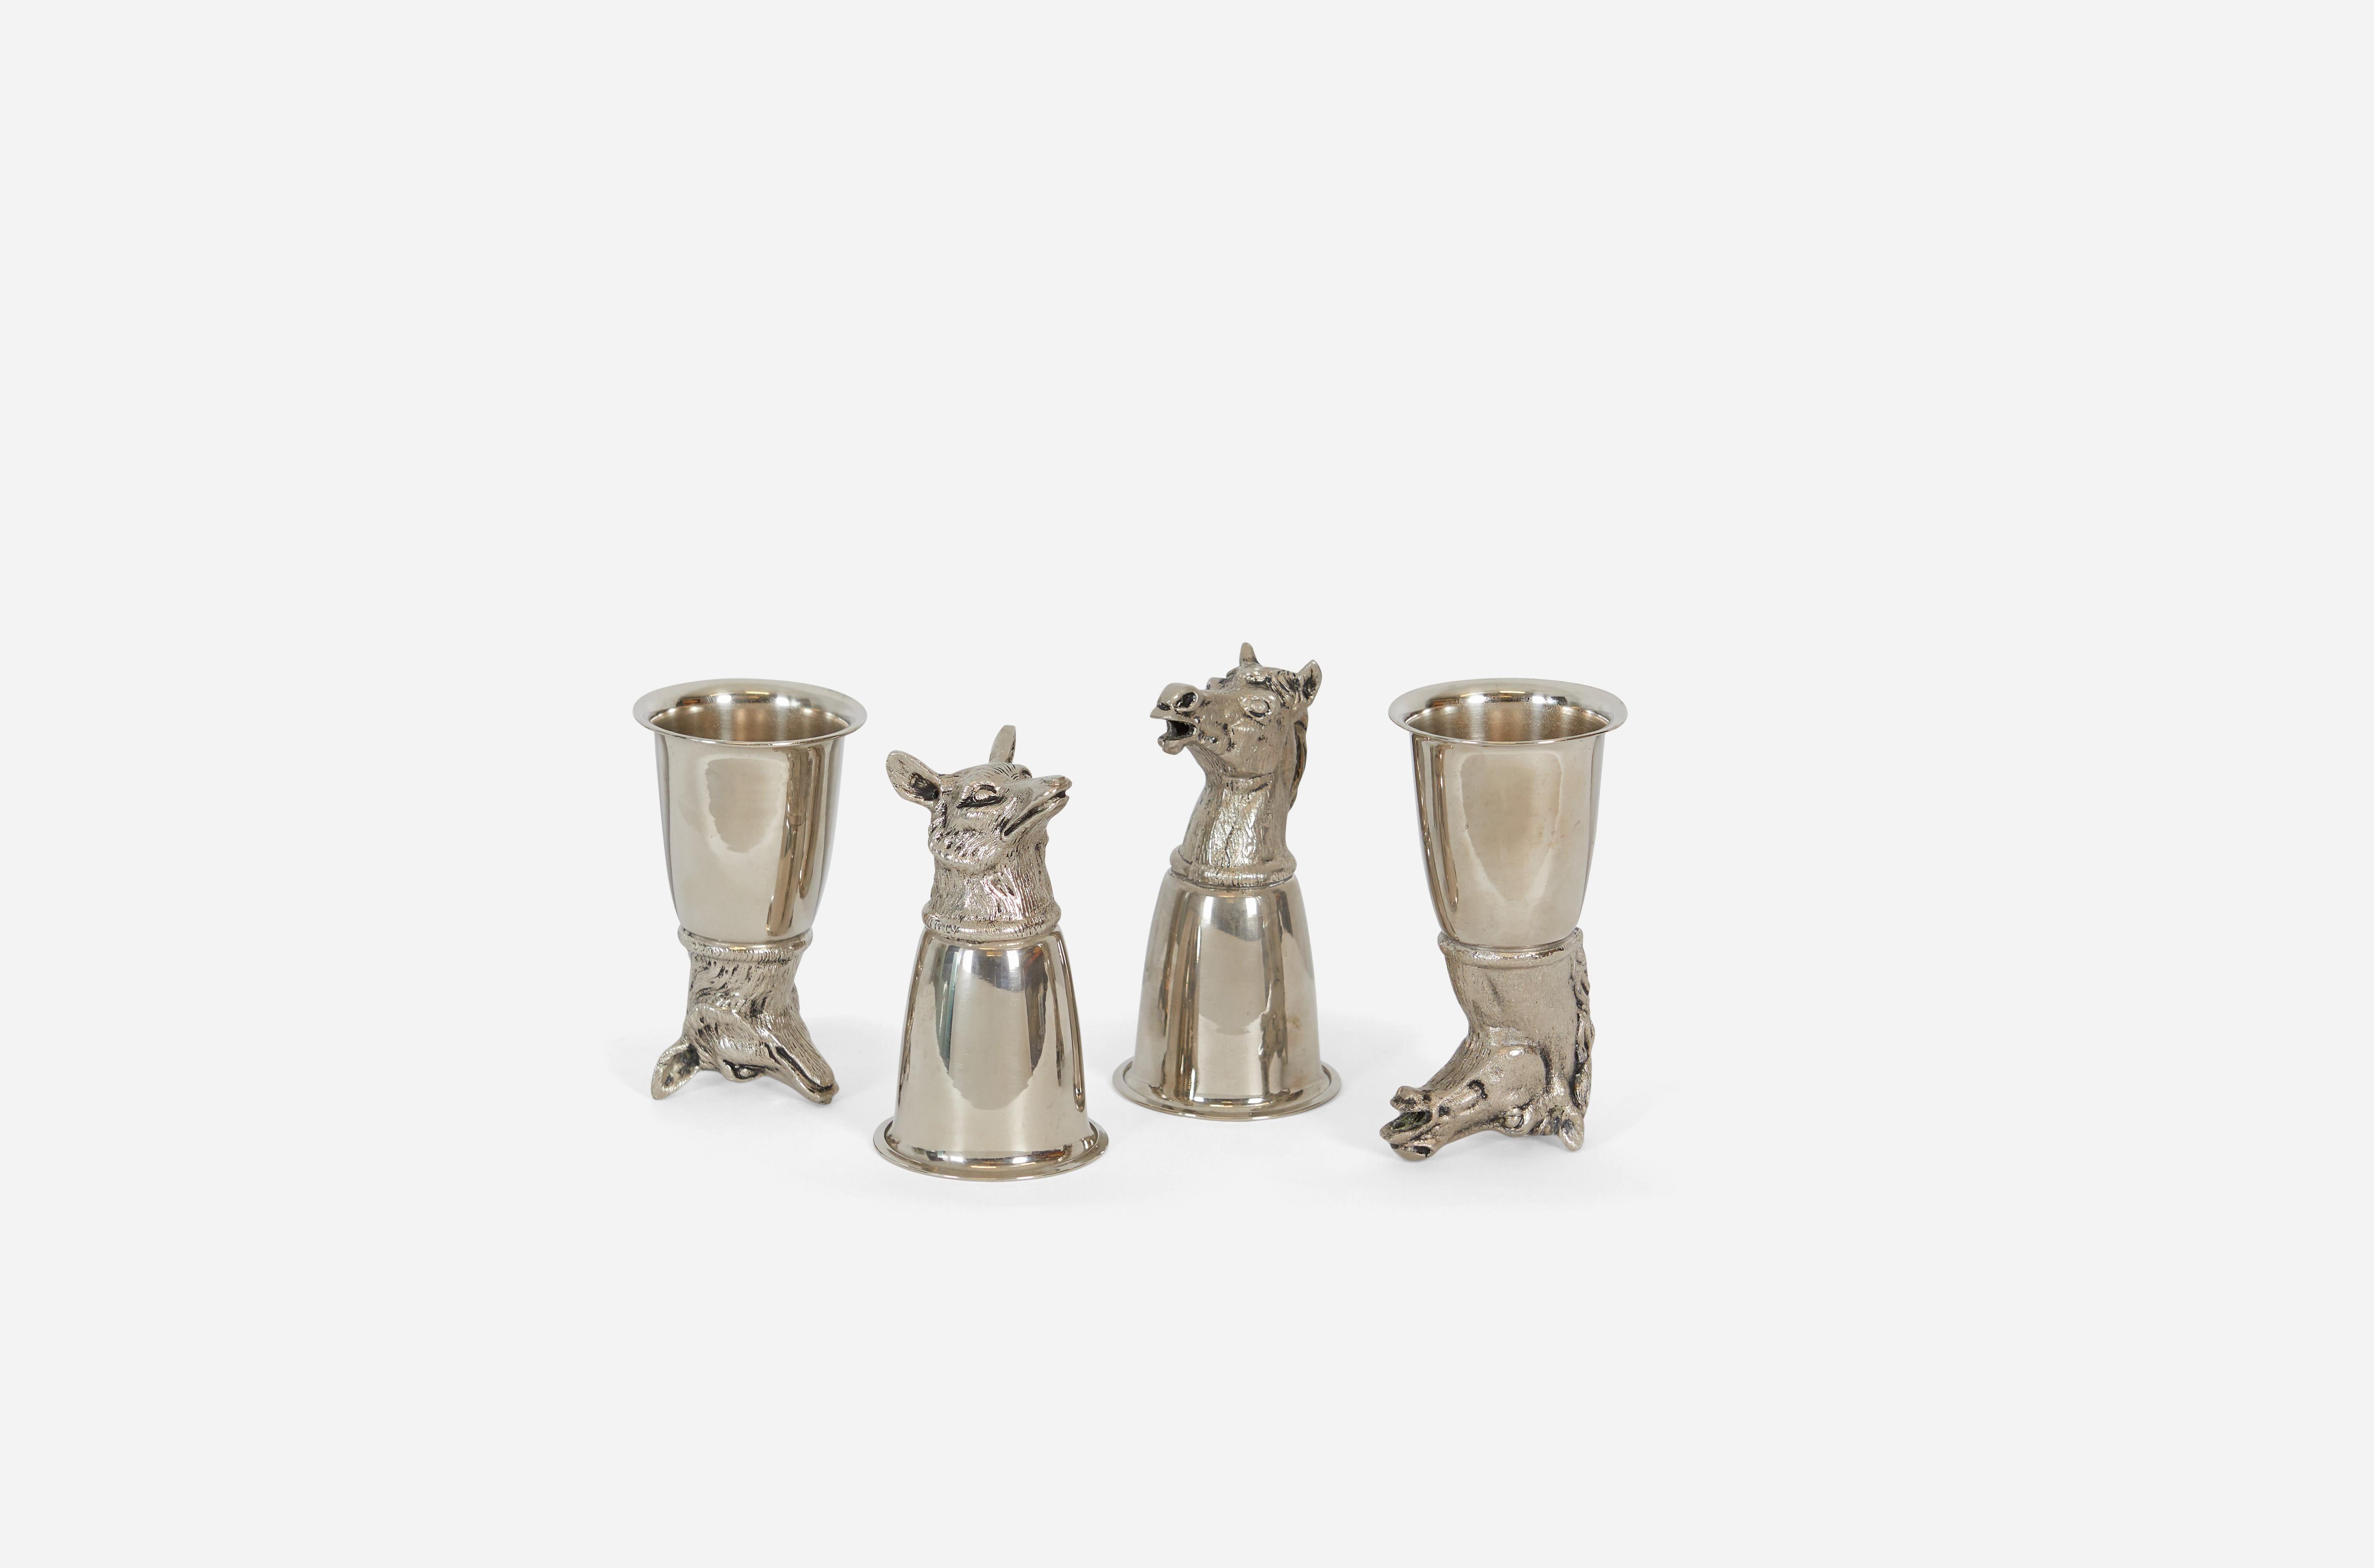 Set of 4 silver plate stirrup cups by Gucci, Italy, circa 1970s. 2 horse and 2 wolf.